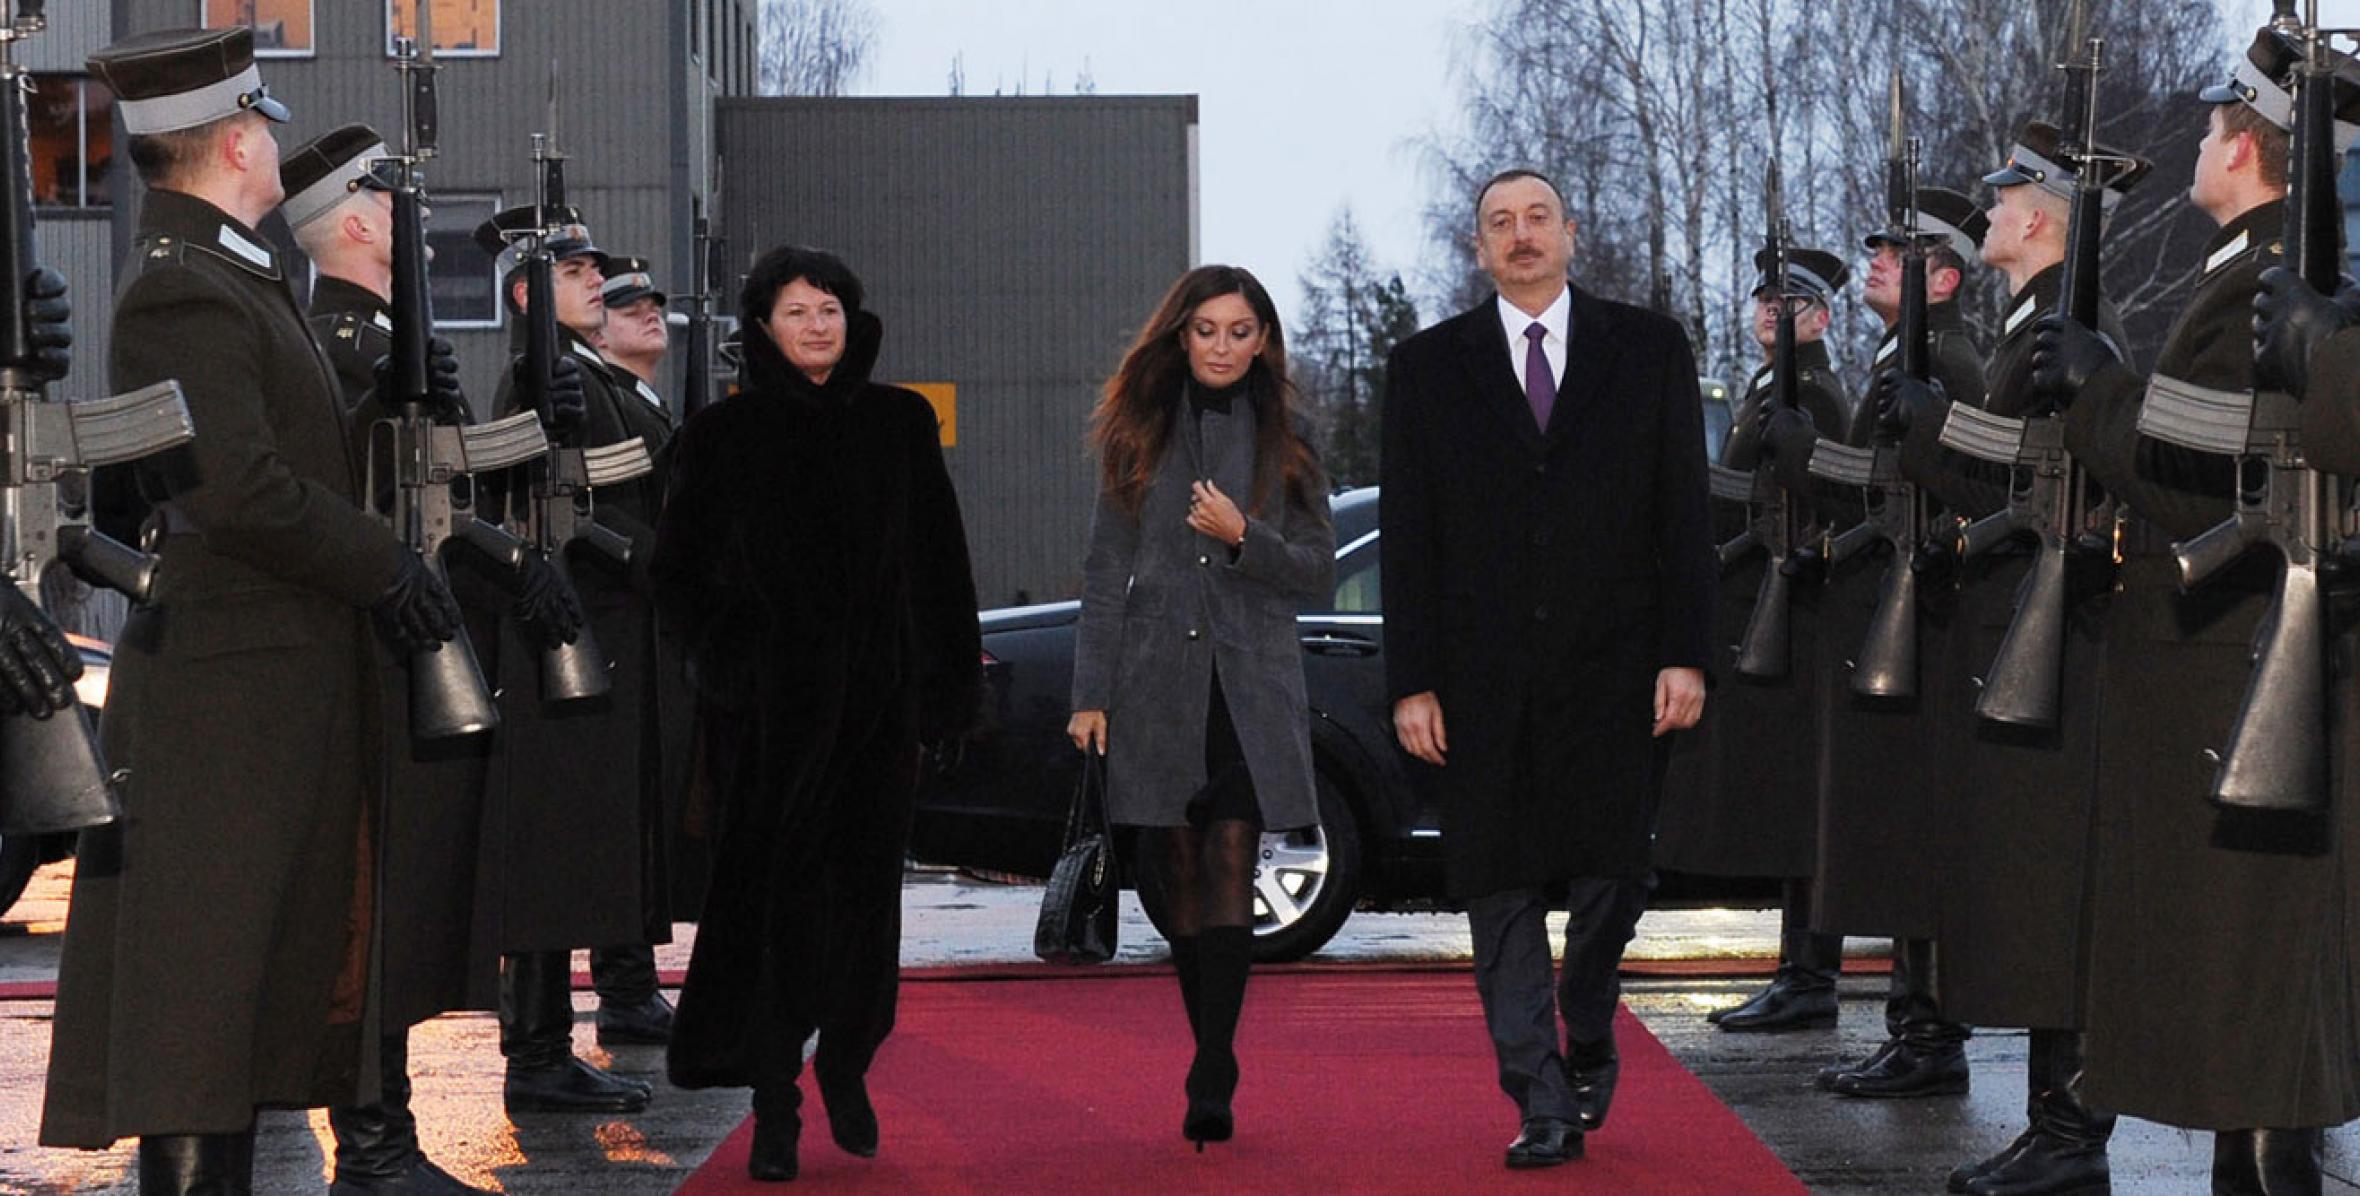 Visit of Ilham Aliyev to the Republic of Latvia ended